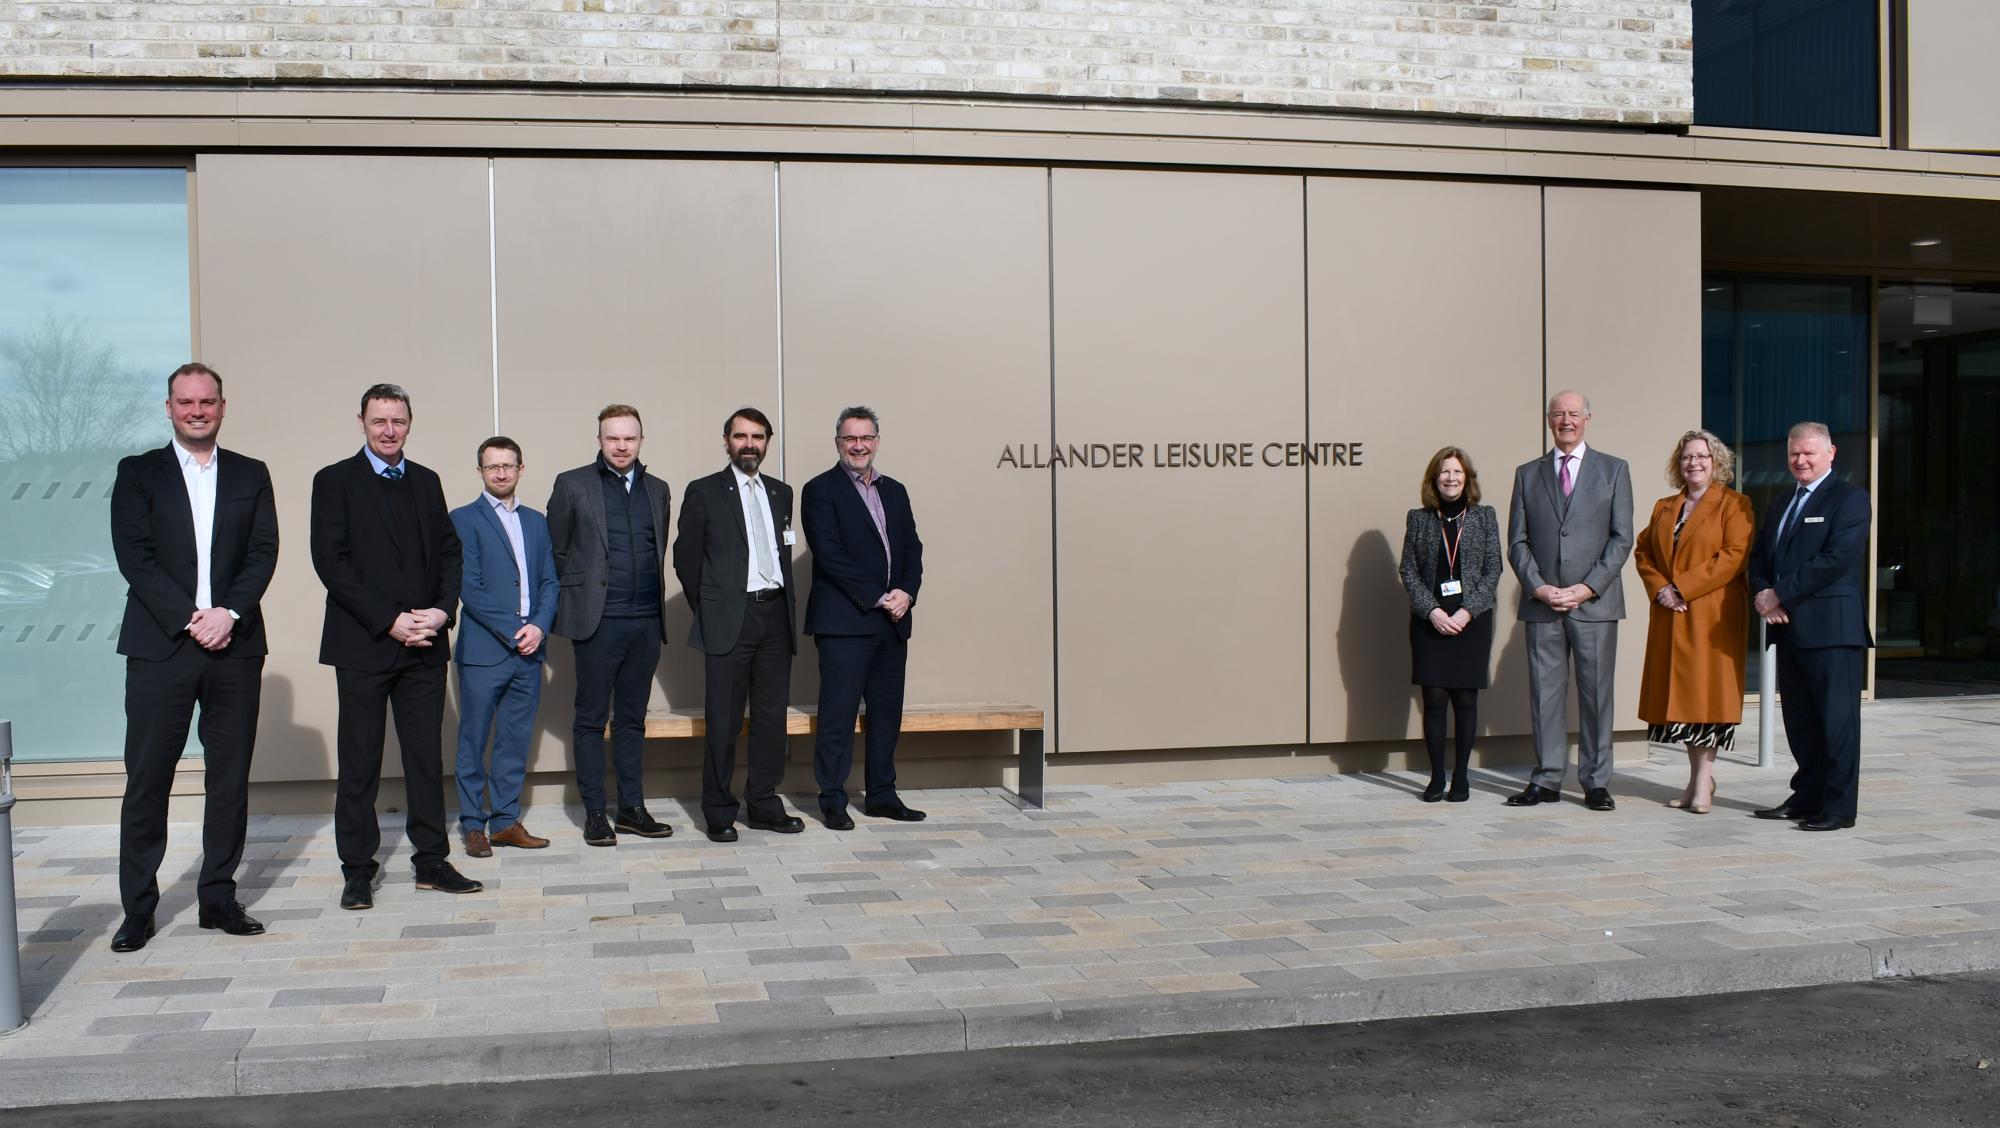 Councillor Gordan Low, Jim Neill and others outside the new Allander Leisure Centre